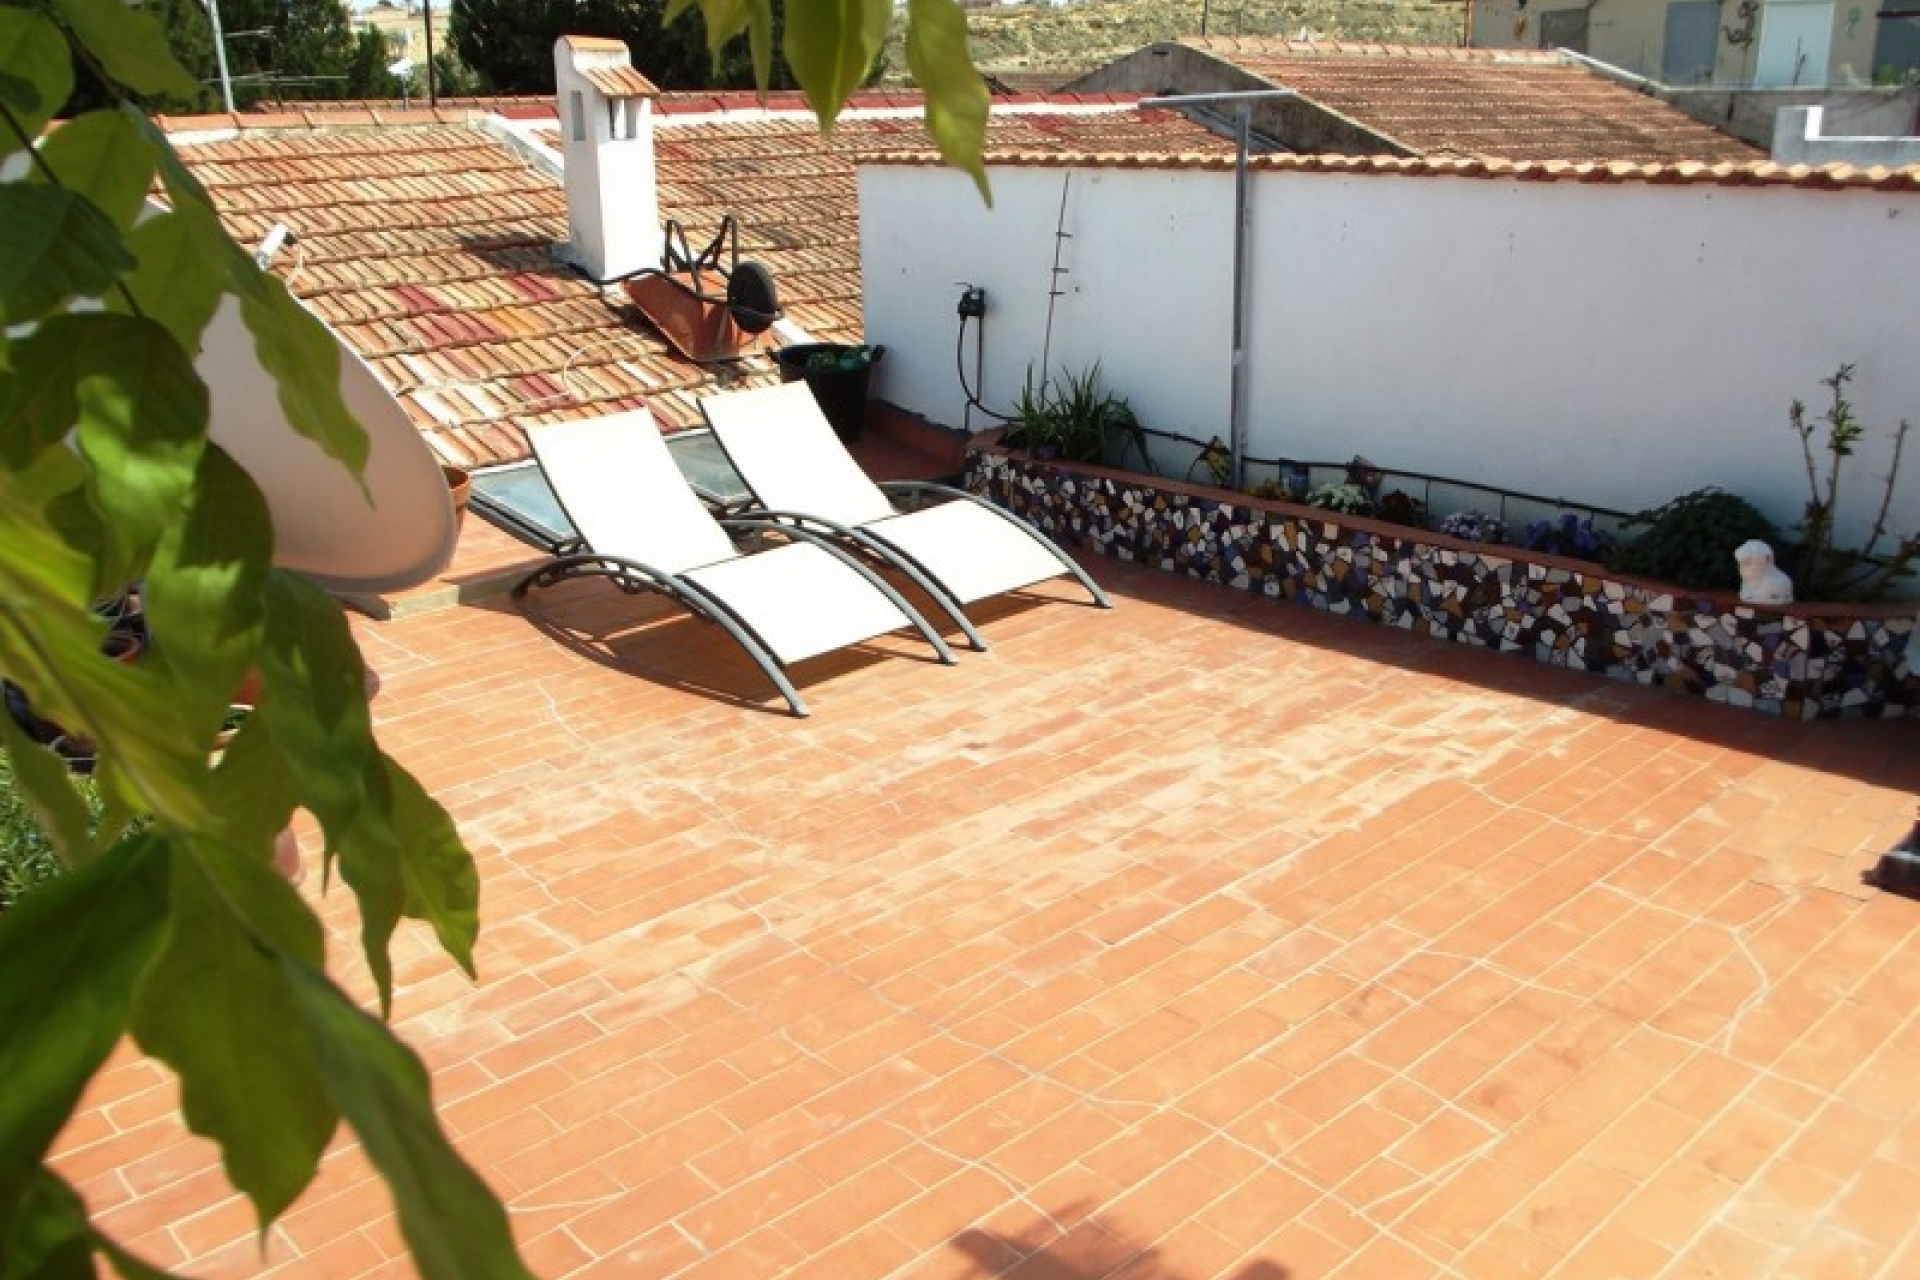 For sale townhouse in Rojales, cheap bargain property close to Quesada and Benimar, cheap bargain costa blanca for sale.